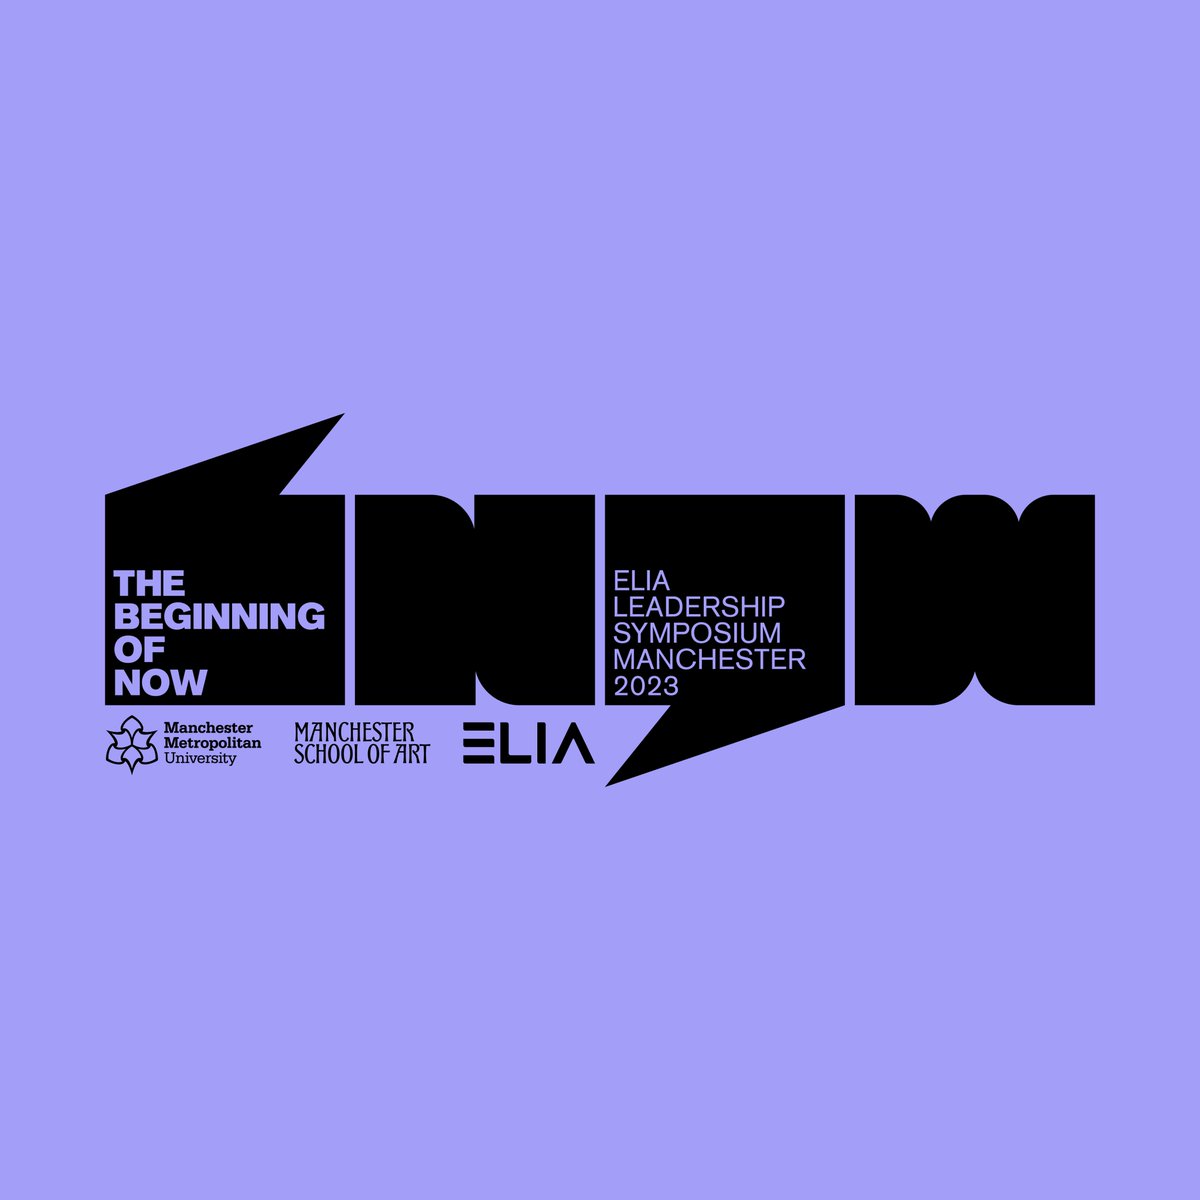 New branding for @McrSchArt @ManMetUni and @ELIAartschools 
The Beginning of Now is a leadership symposium on the future of the Art School post pandemic. Dialogue & conversation are important in order to create change. The identity needed to reflect that.
More on my insta stories